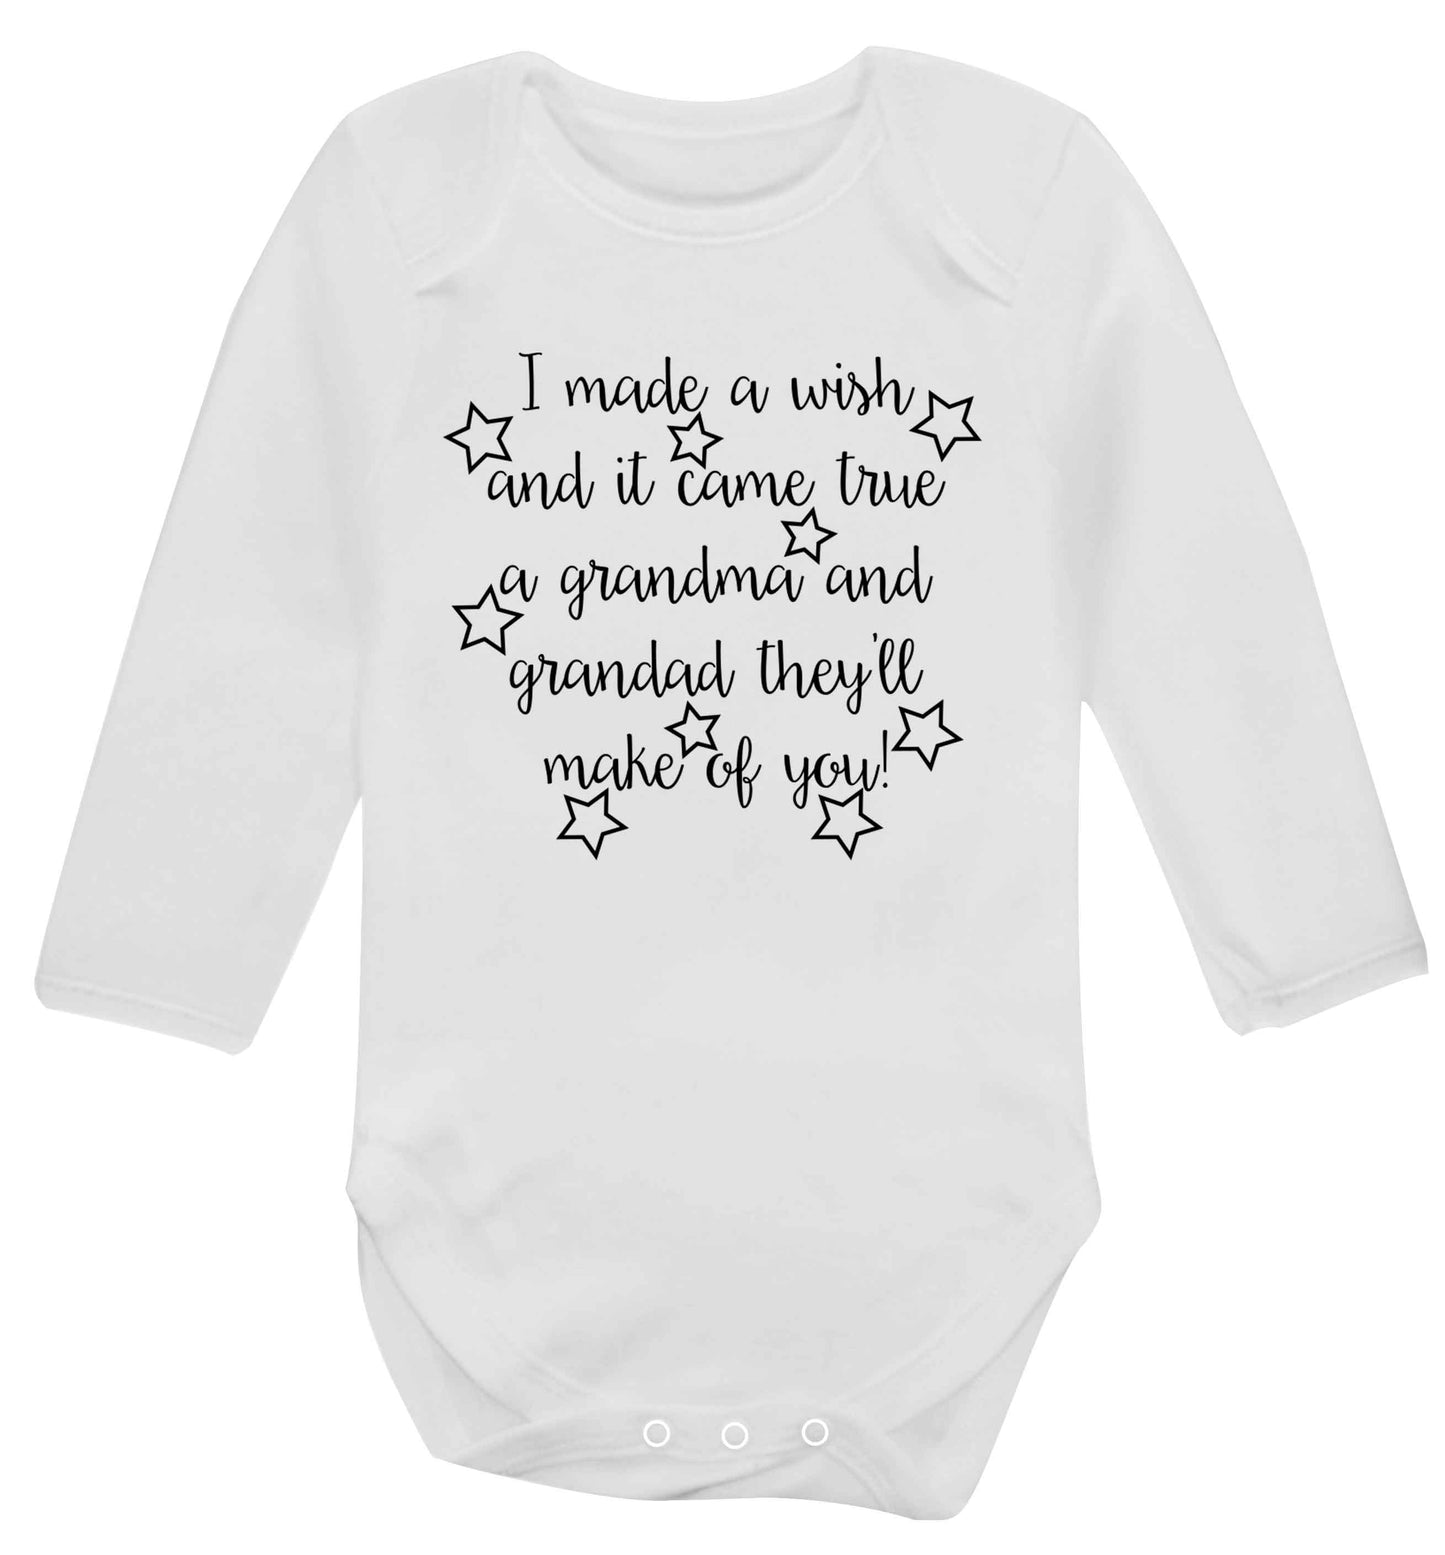 I made a wish and it came true a grandma and grandad they'll make of you! Baby Vest long sleeved white 6-12 months